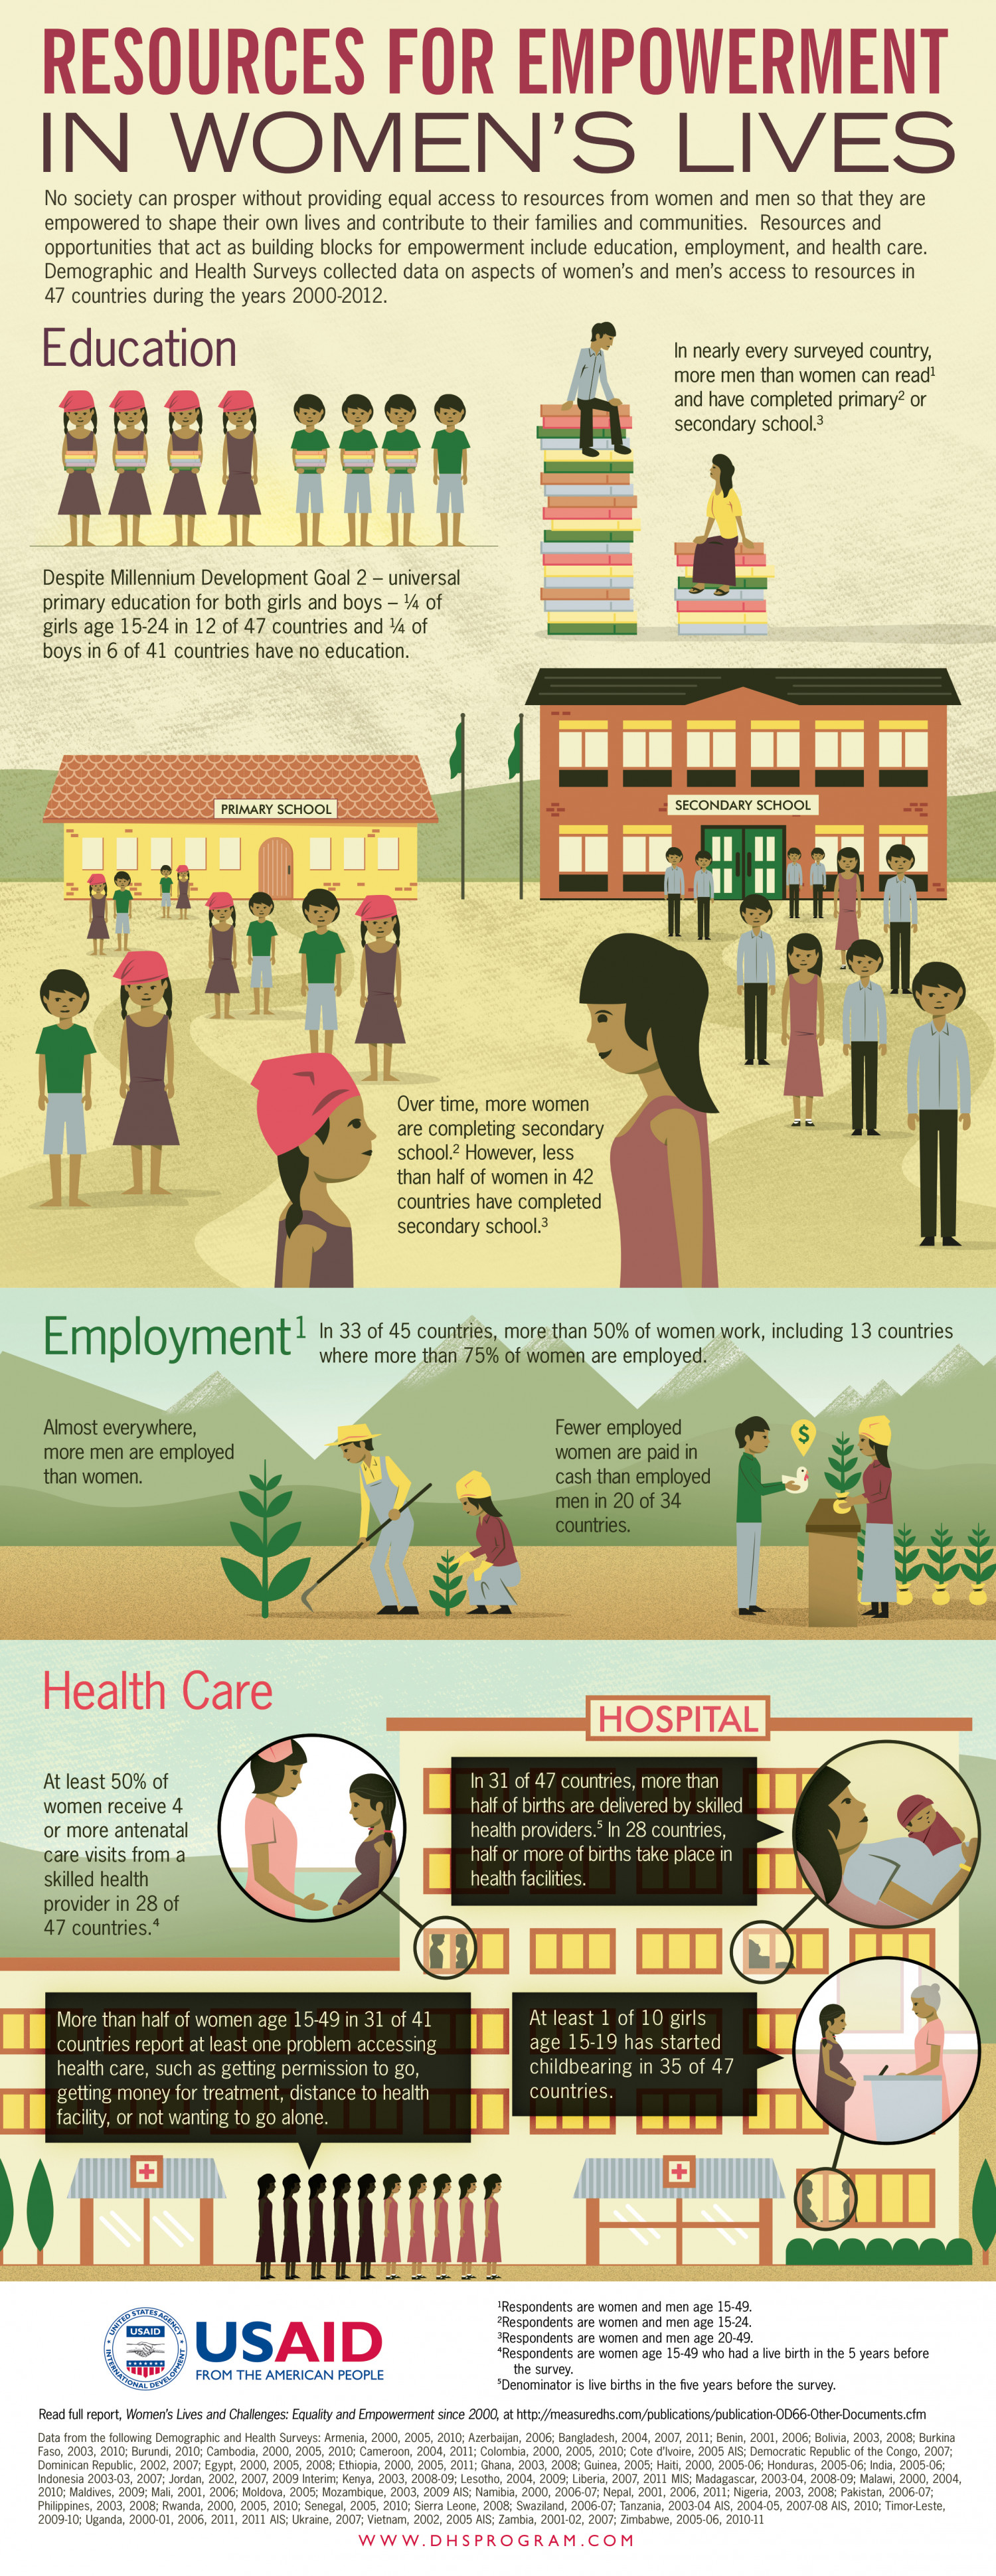 Resources for Empowerment in Women's Lives Infographic